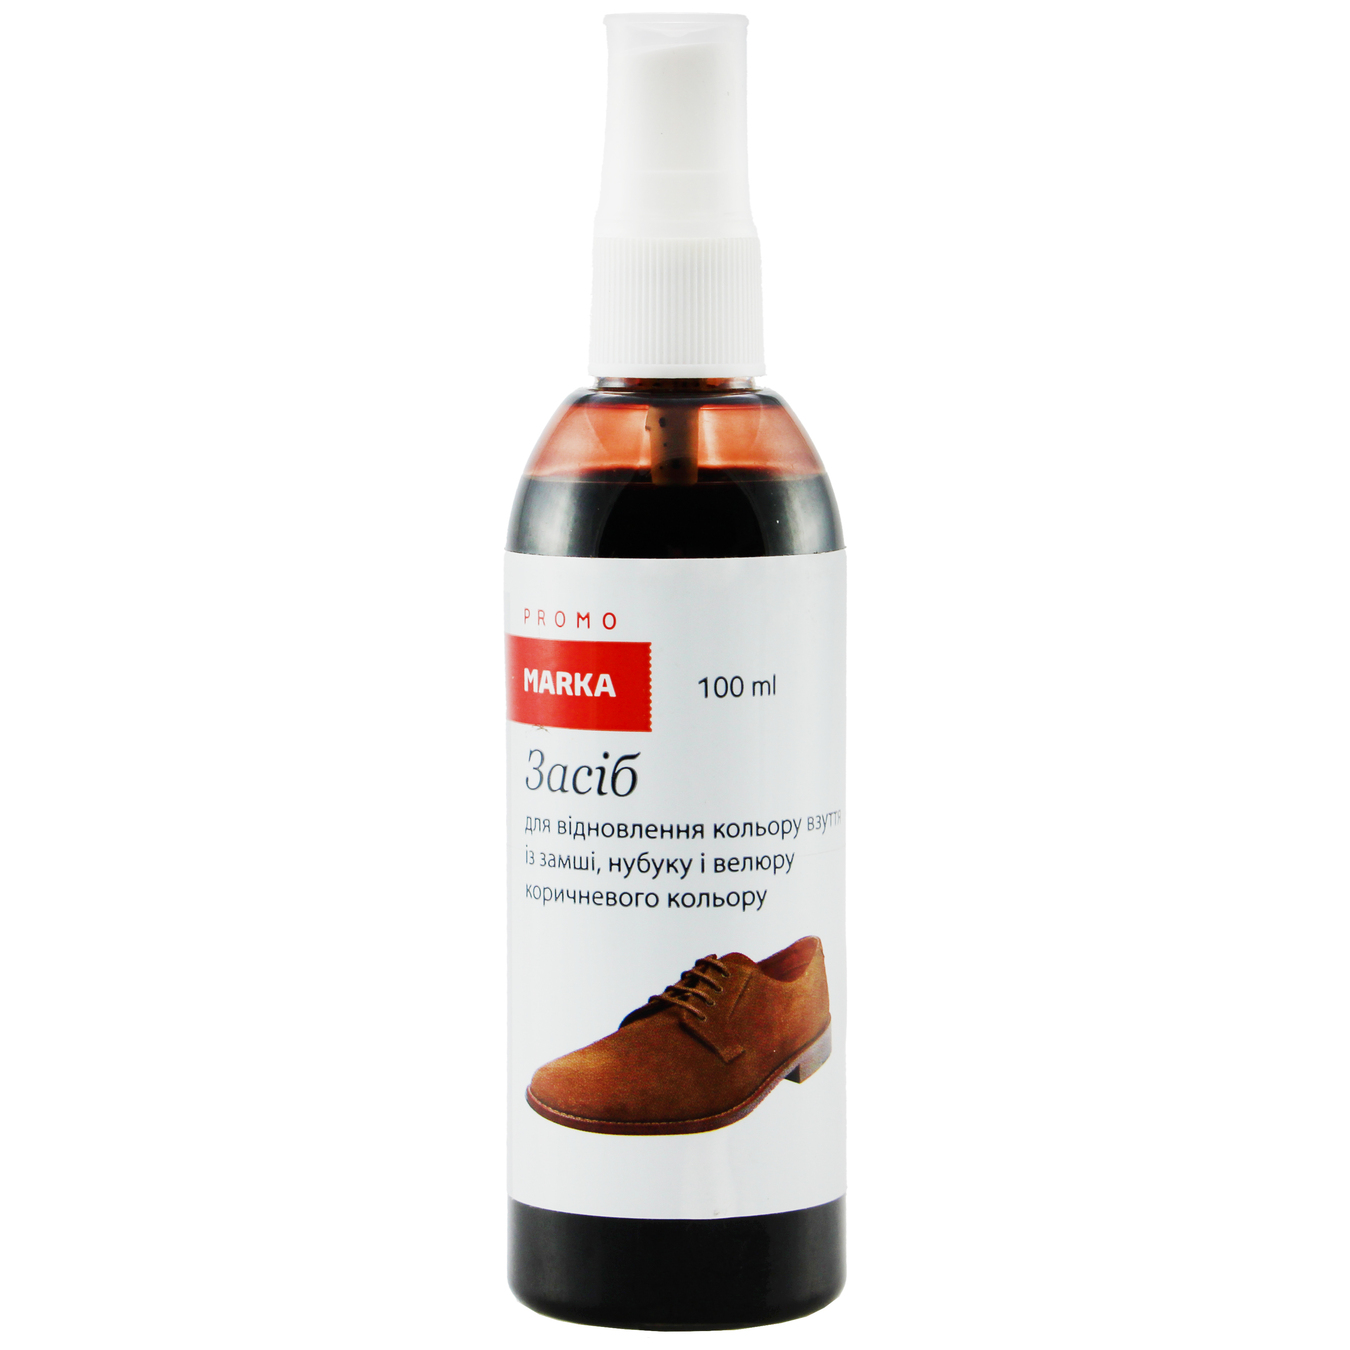 Marka Promo Suede, Nubuck and Velor Shoe Brown Paint 100ml